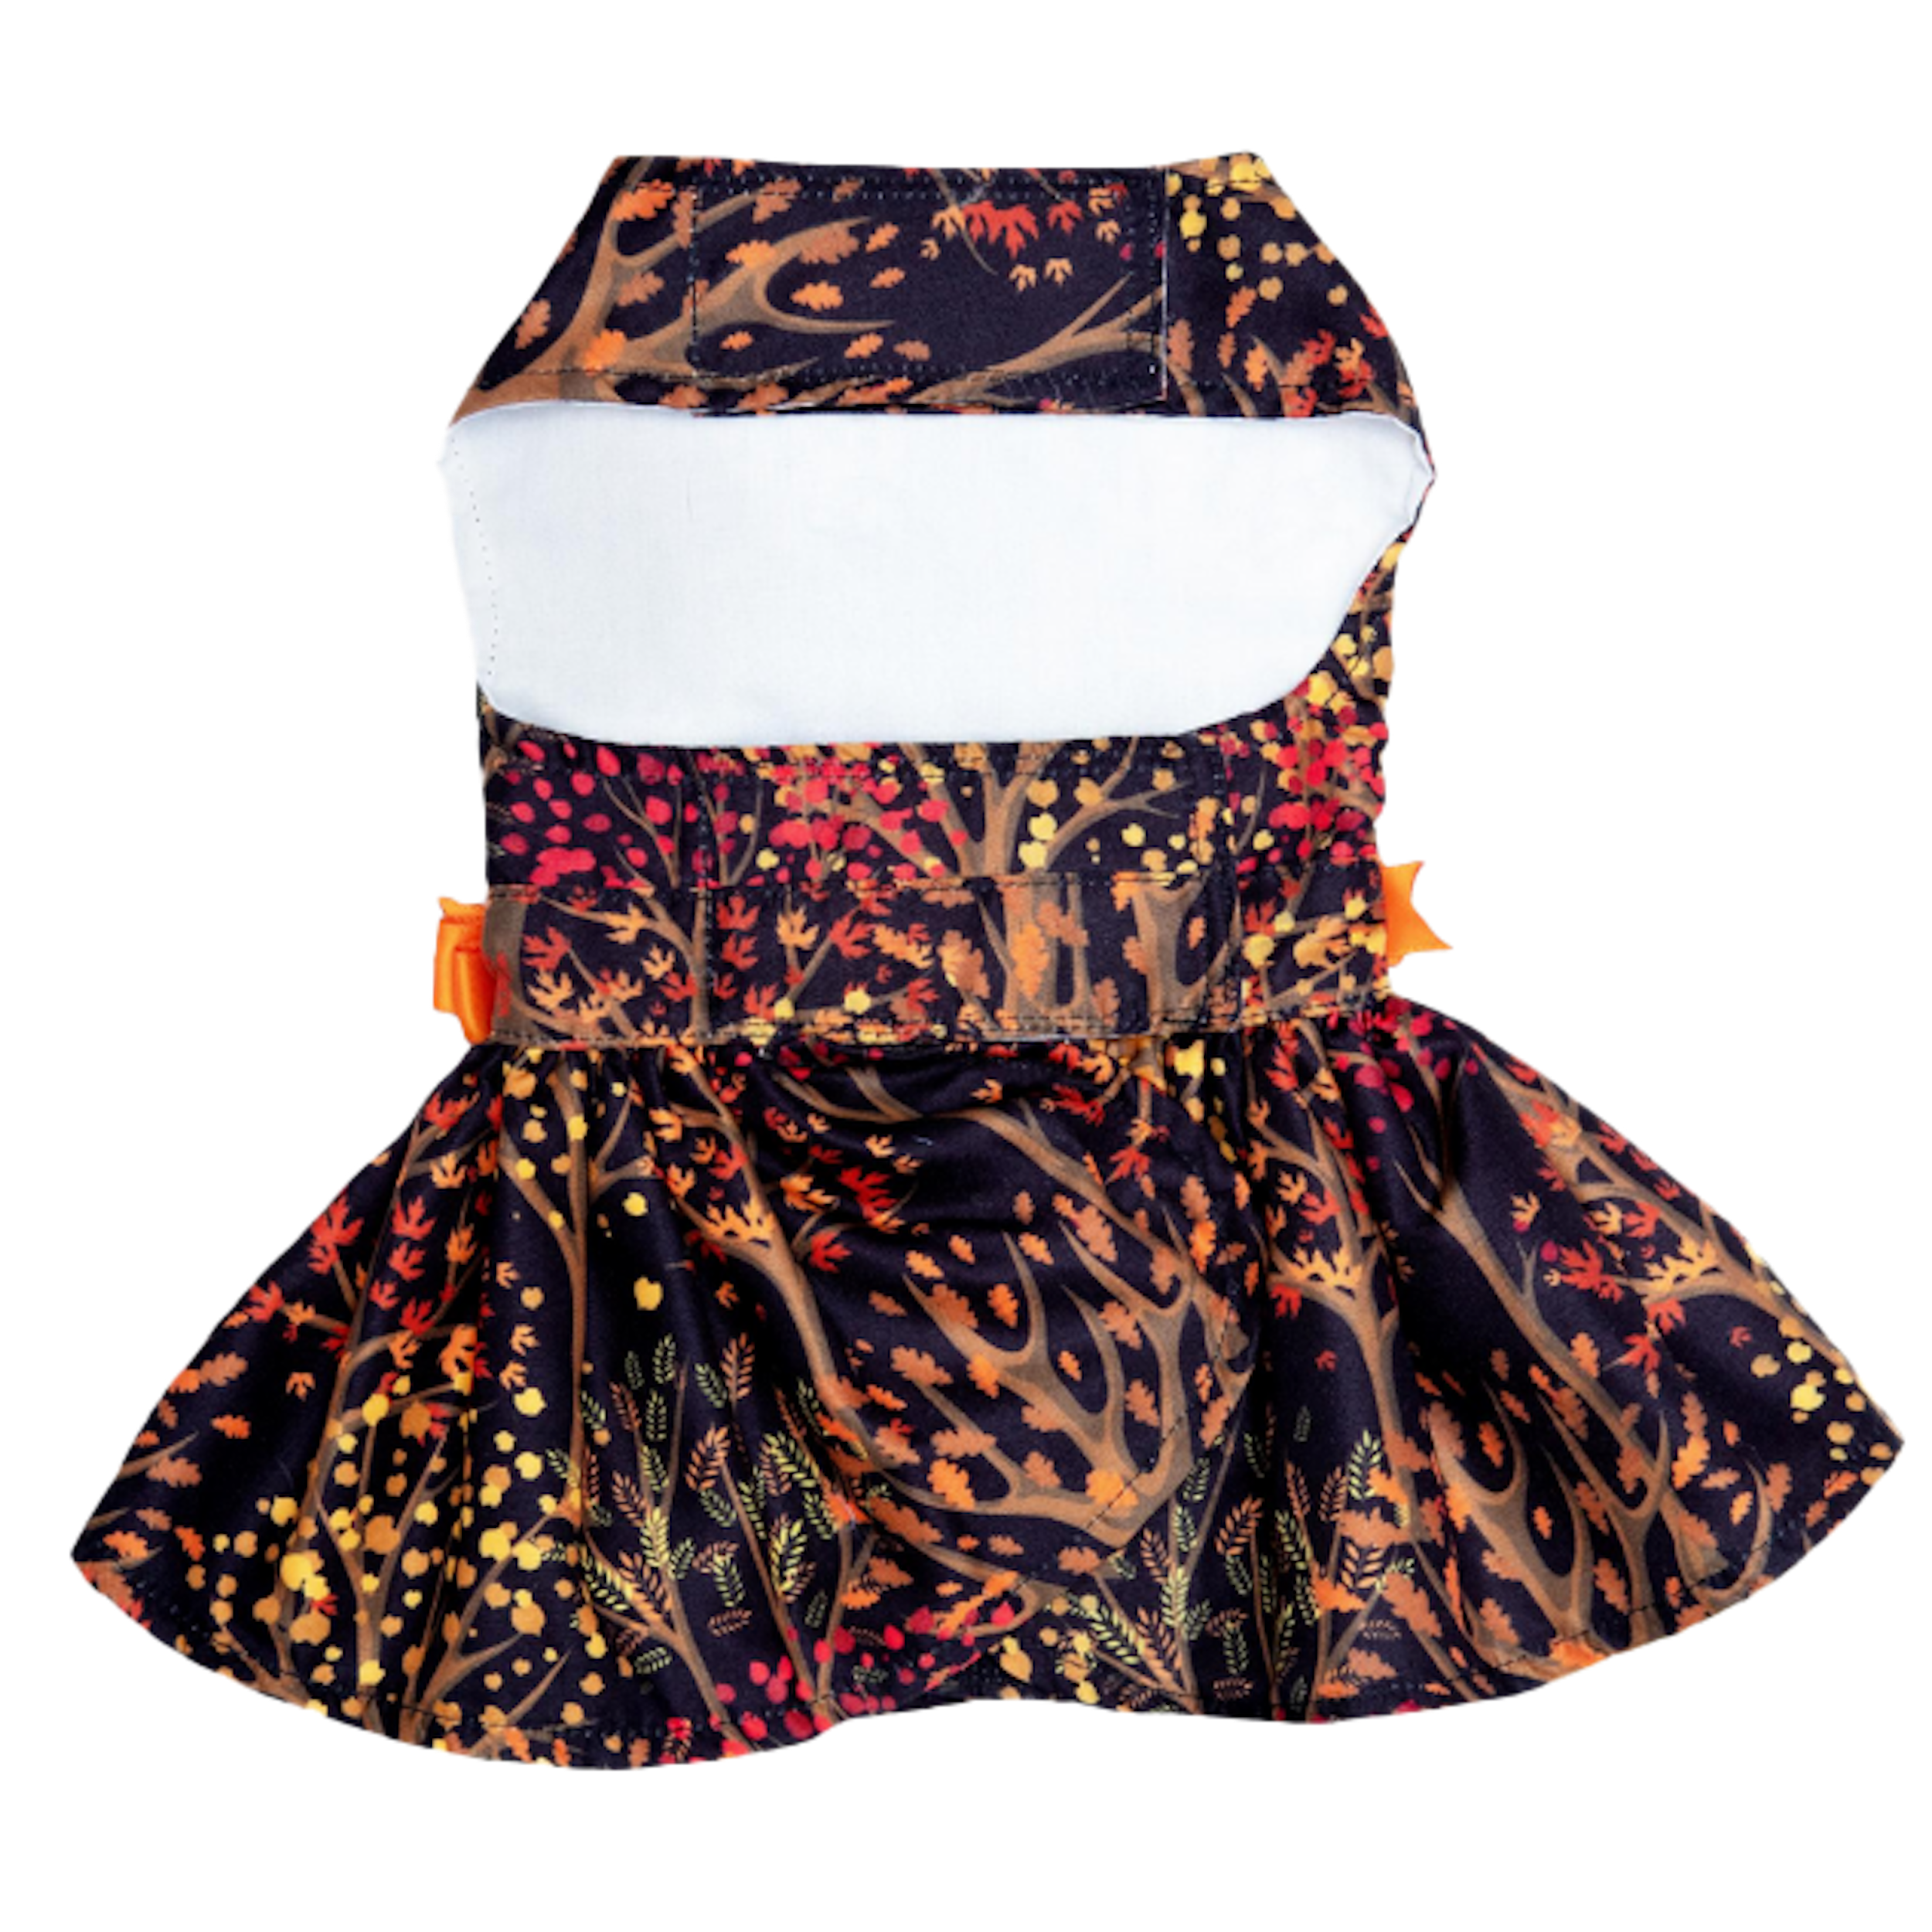 FALL-AUTUMN-LEAVES-DOG-PARTY-DRESS-BOULDERBARKS